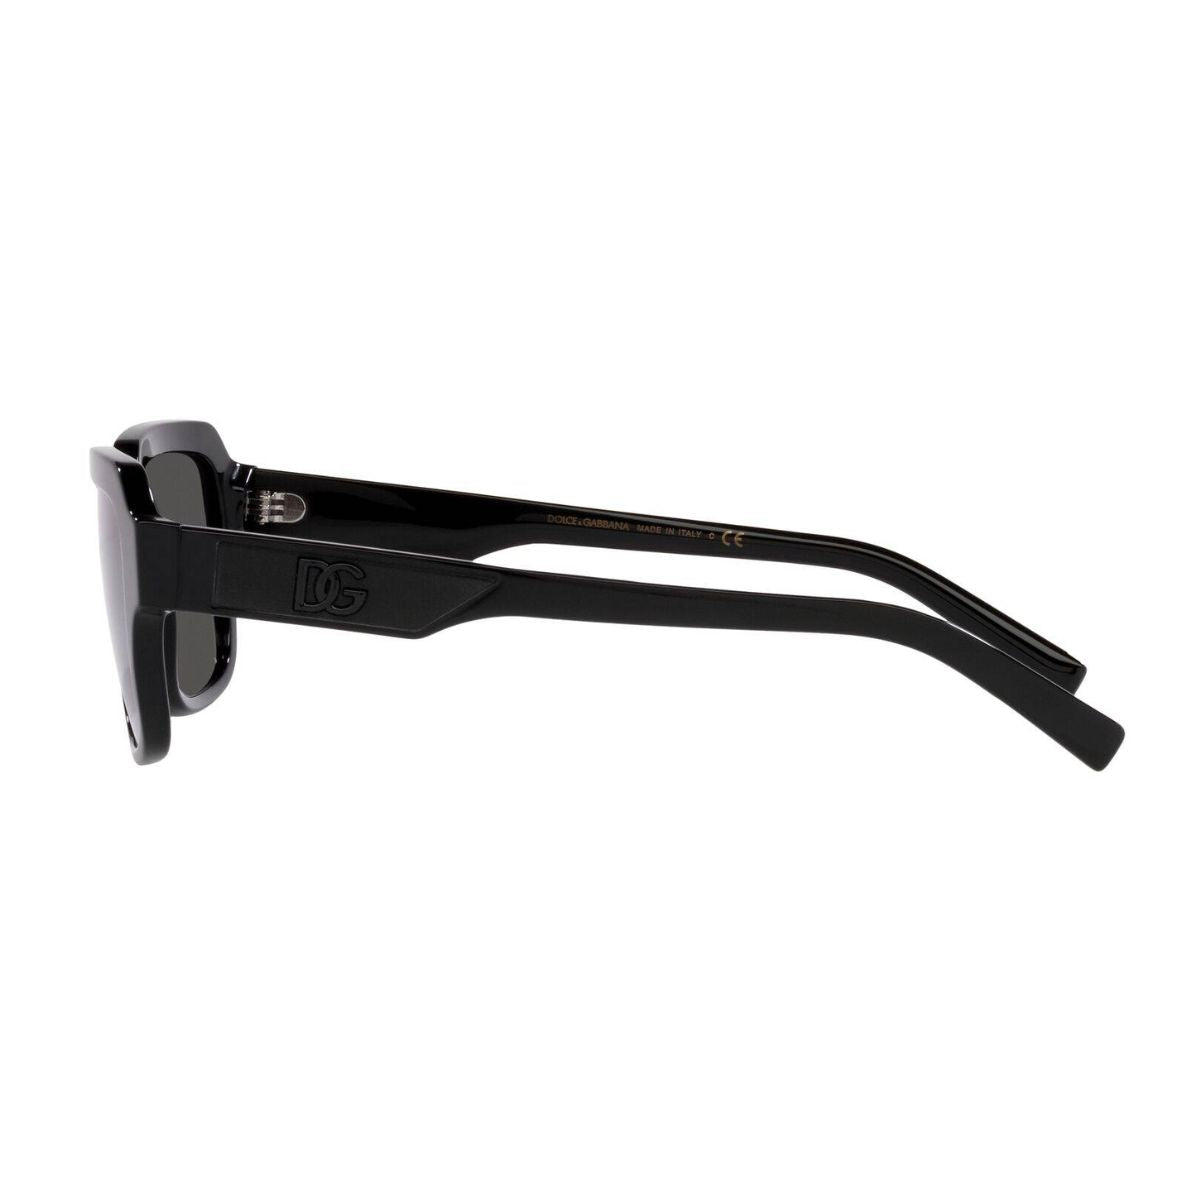 "Explore a variety of branded and cooling glasses including Dolce & Gabbana DG4402 501/87."